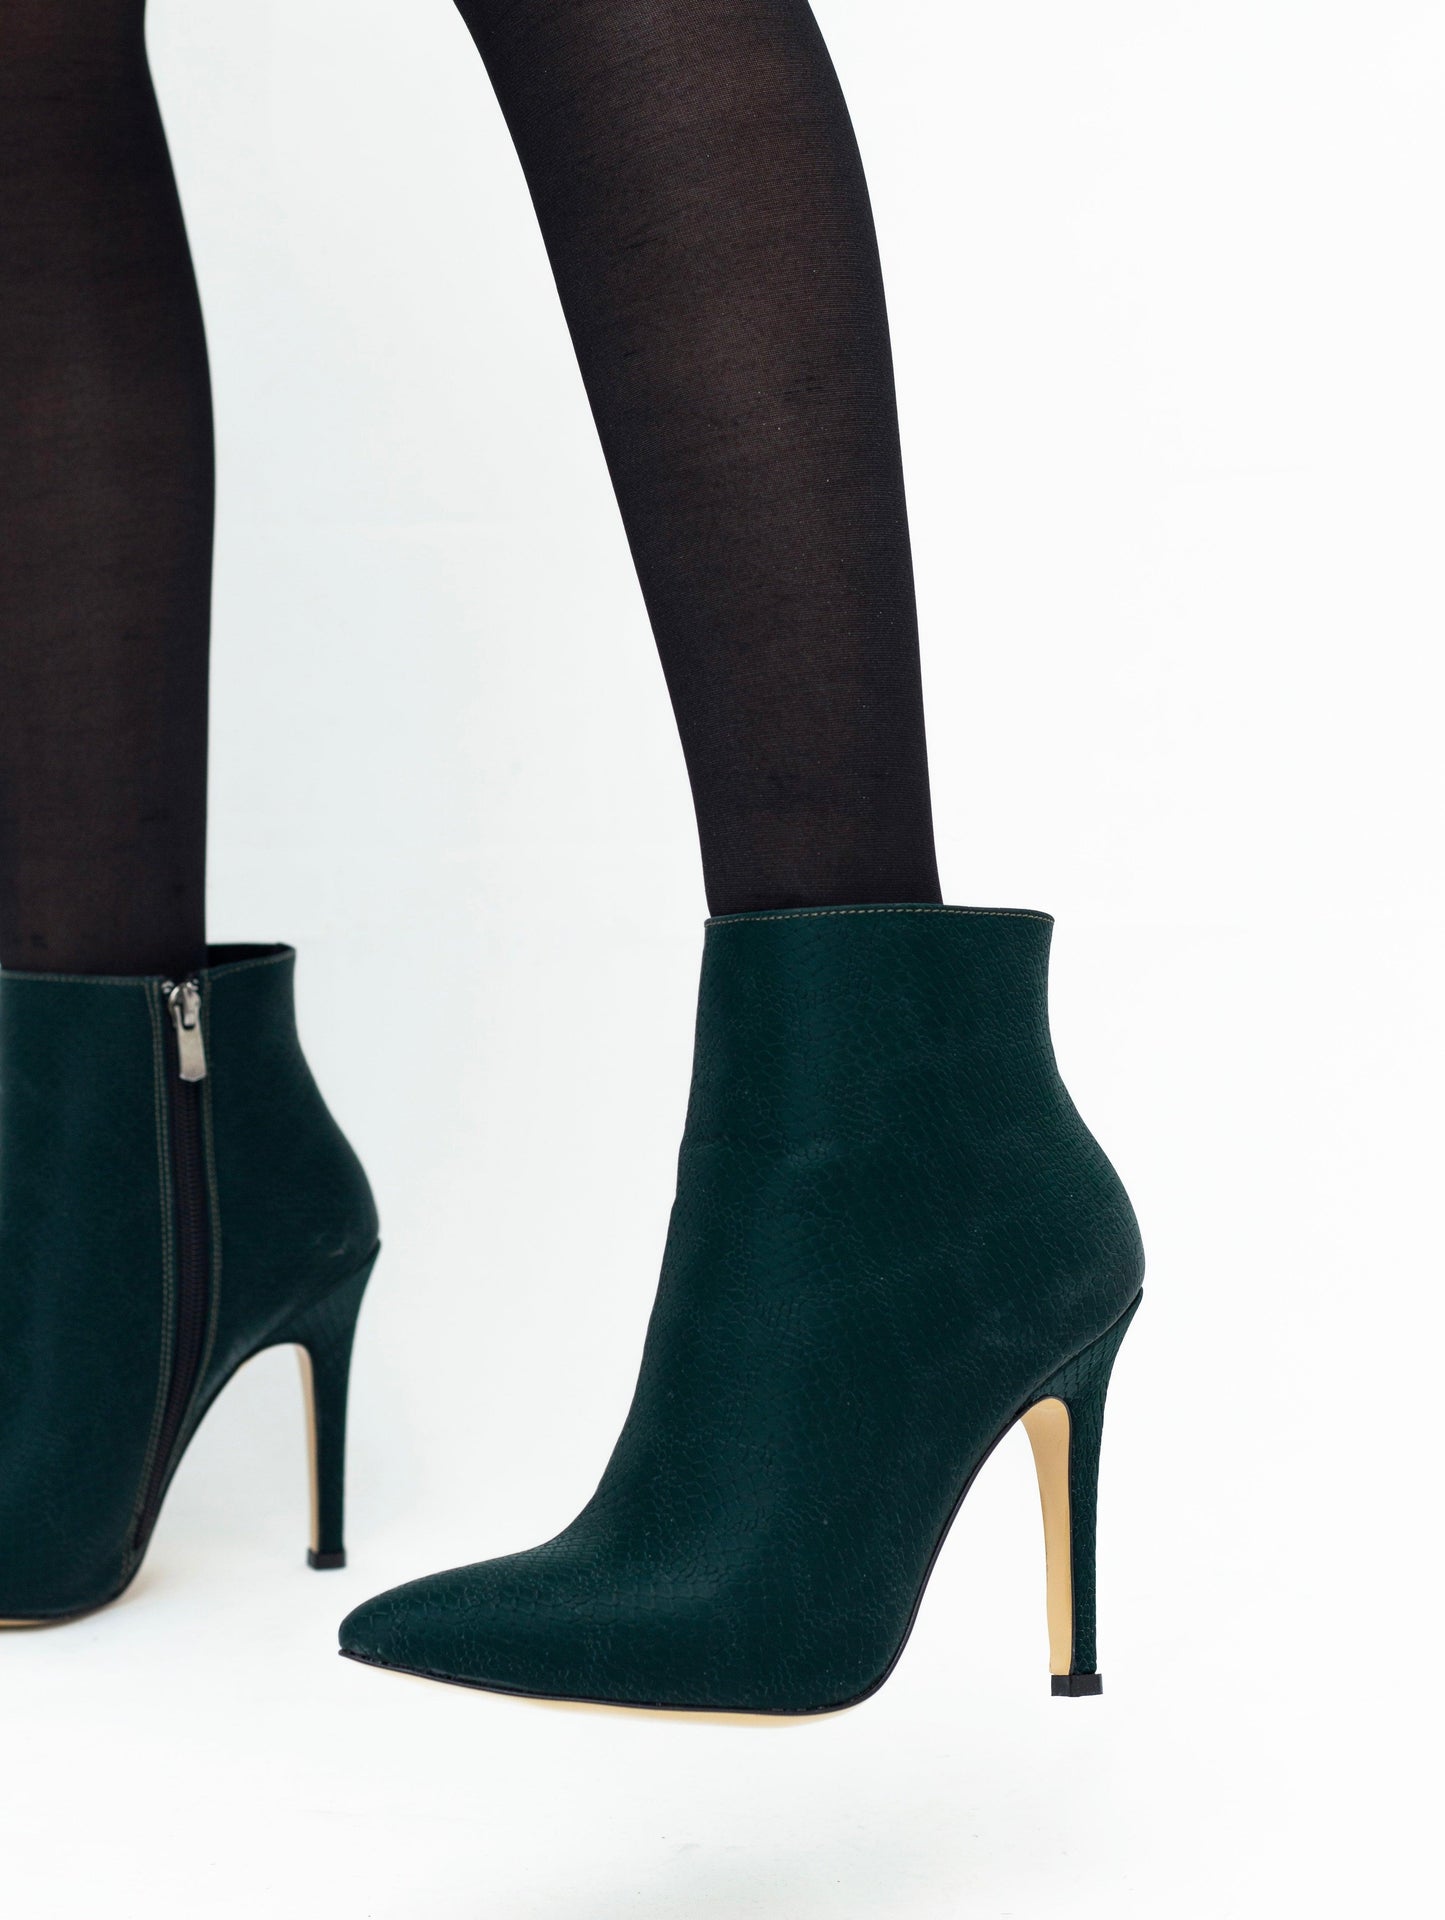 Leather high heeled Ankle Boots - augustshoes